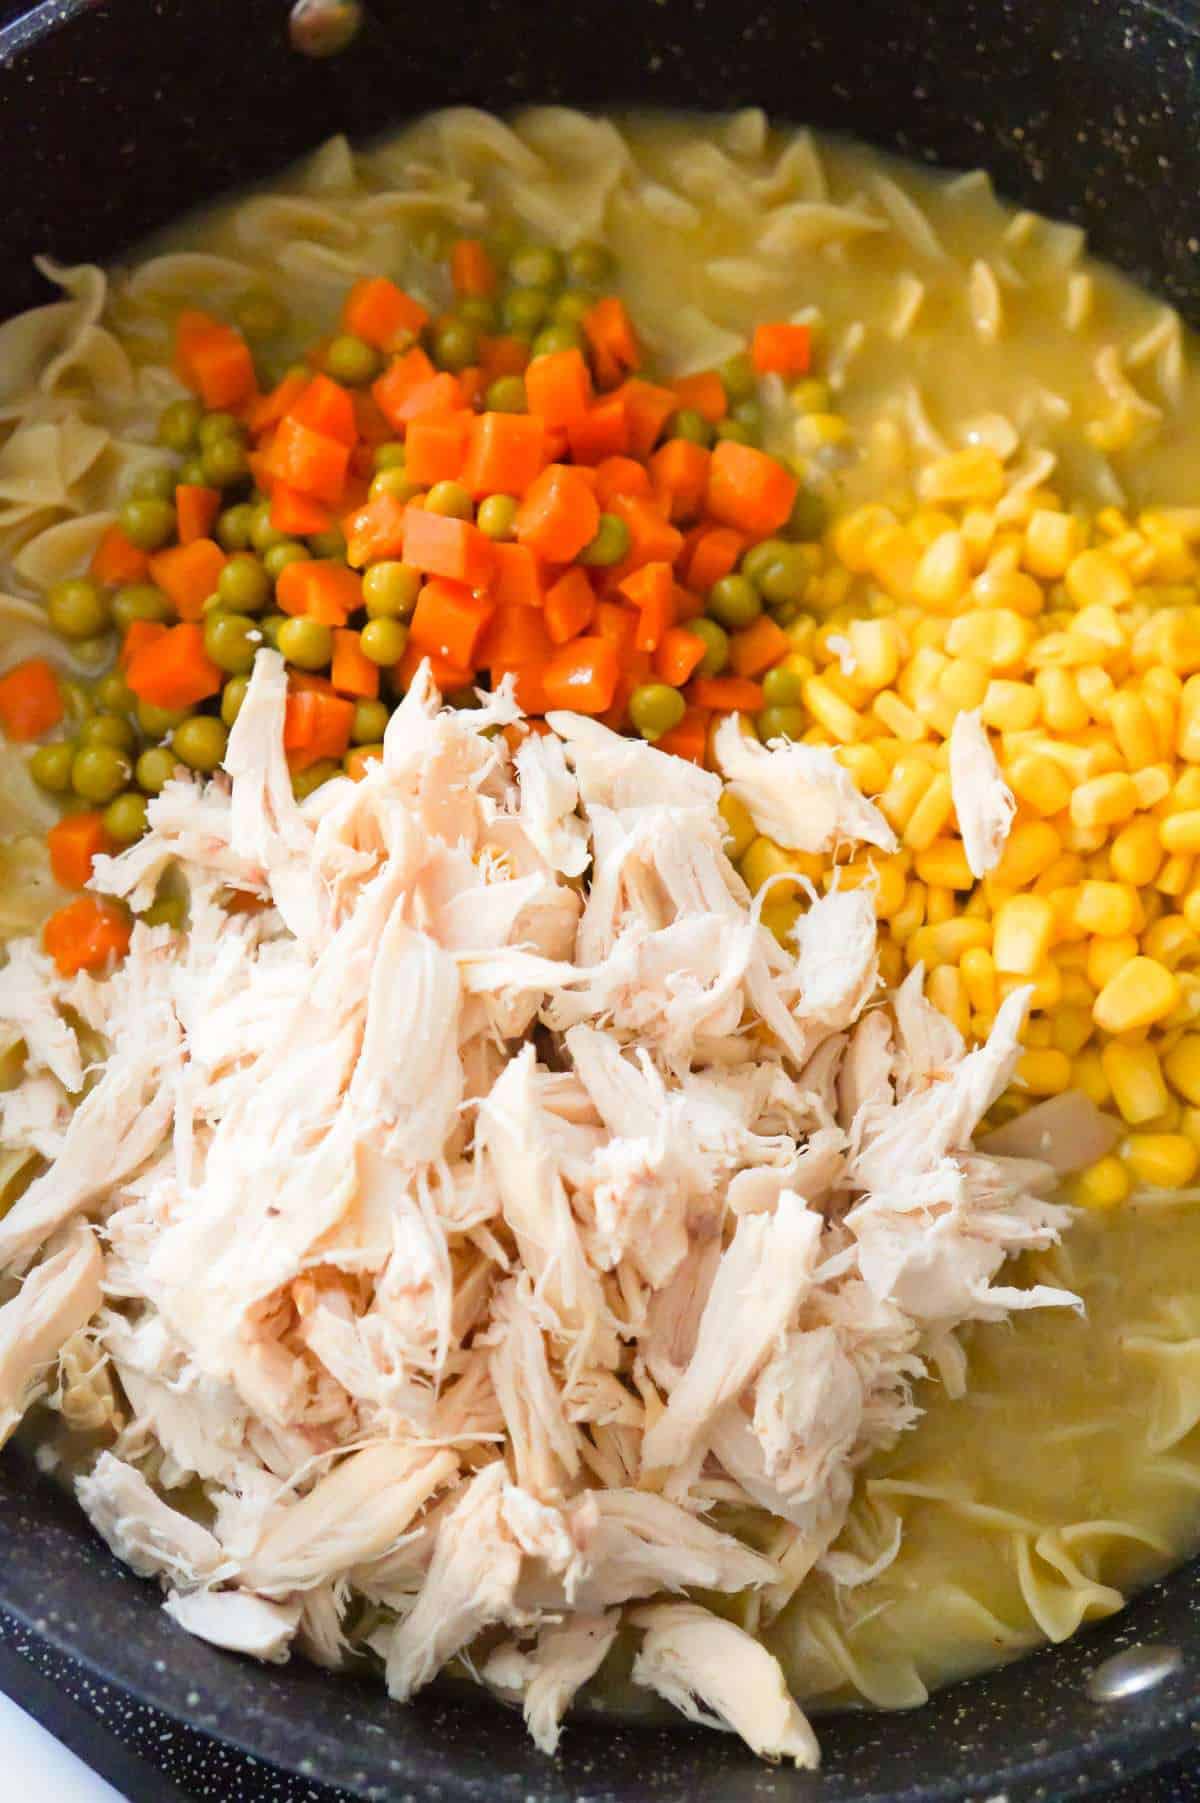 shredded rotisserie chicken, peas and carrots and corn on top of egg noodles in a pot